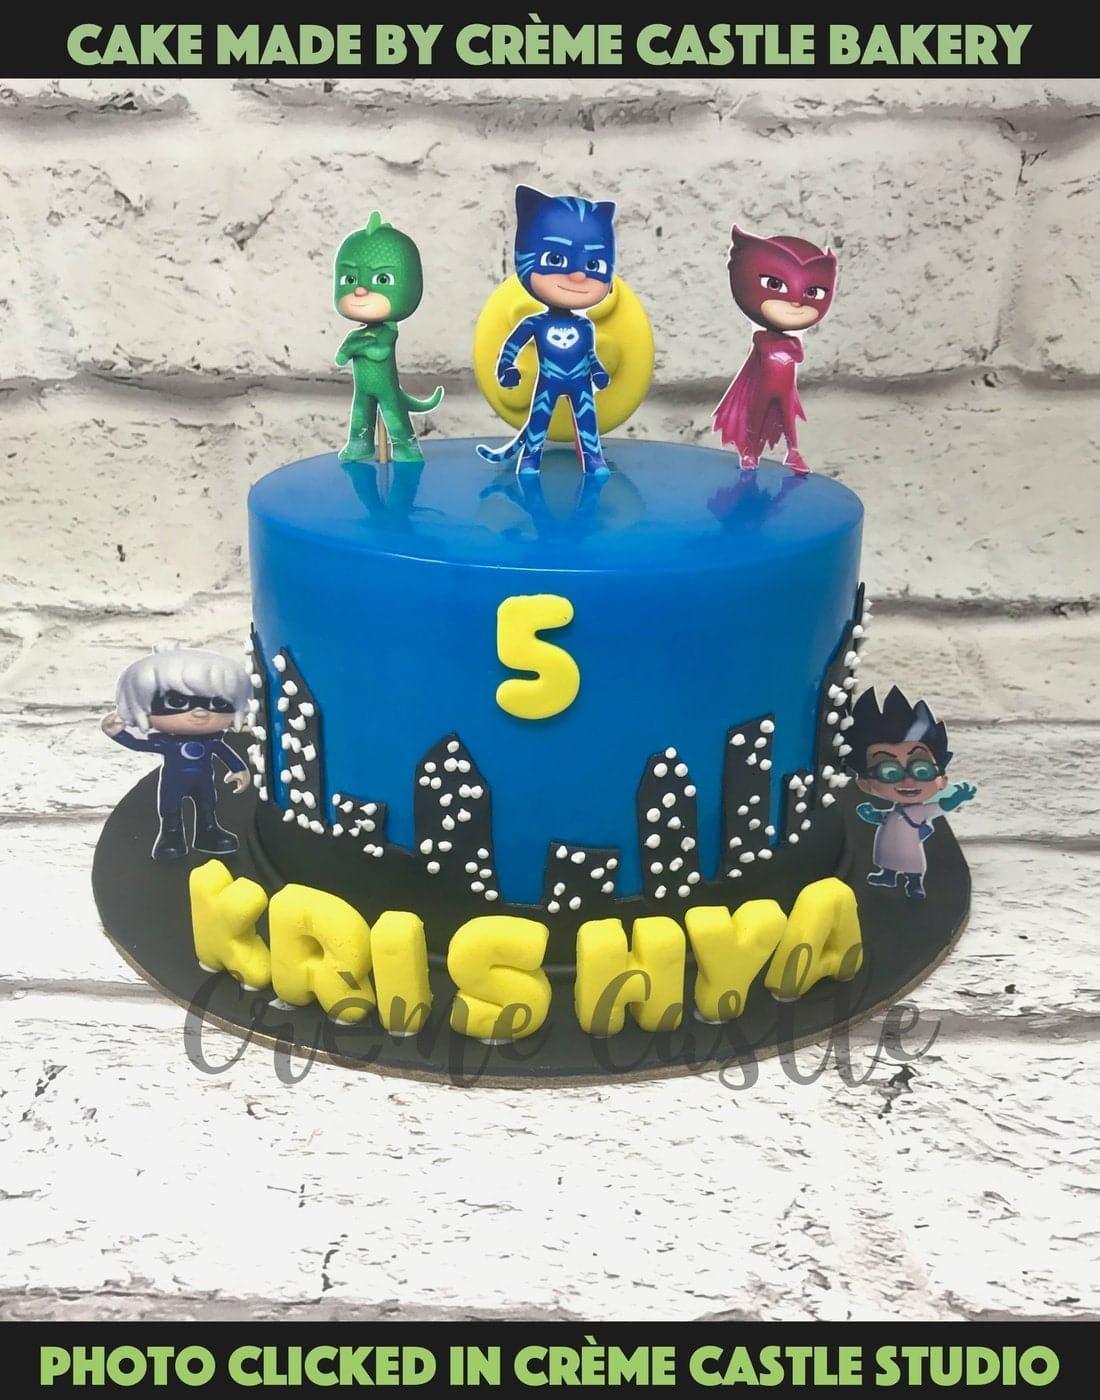 Super PJ Mask Themed Cake For Your Boy's Birthday Cake